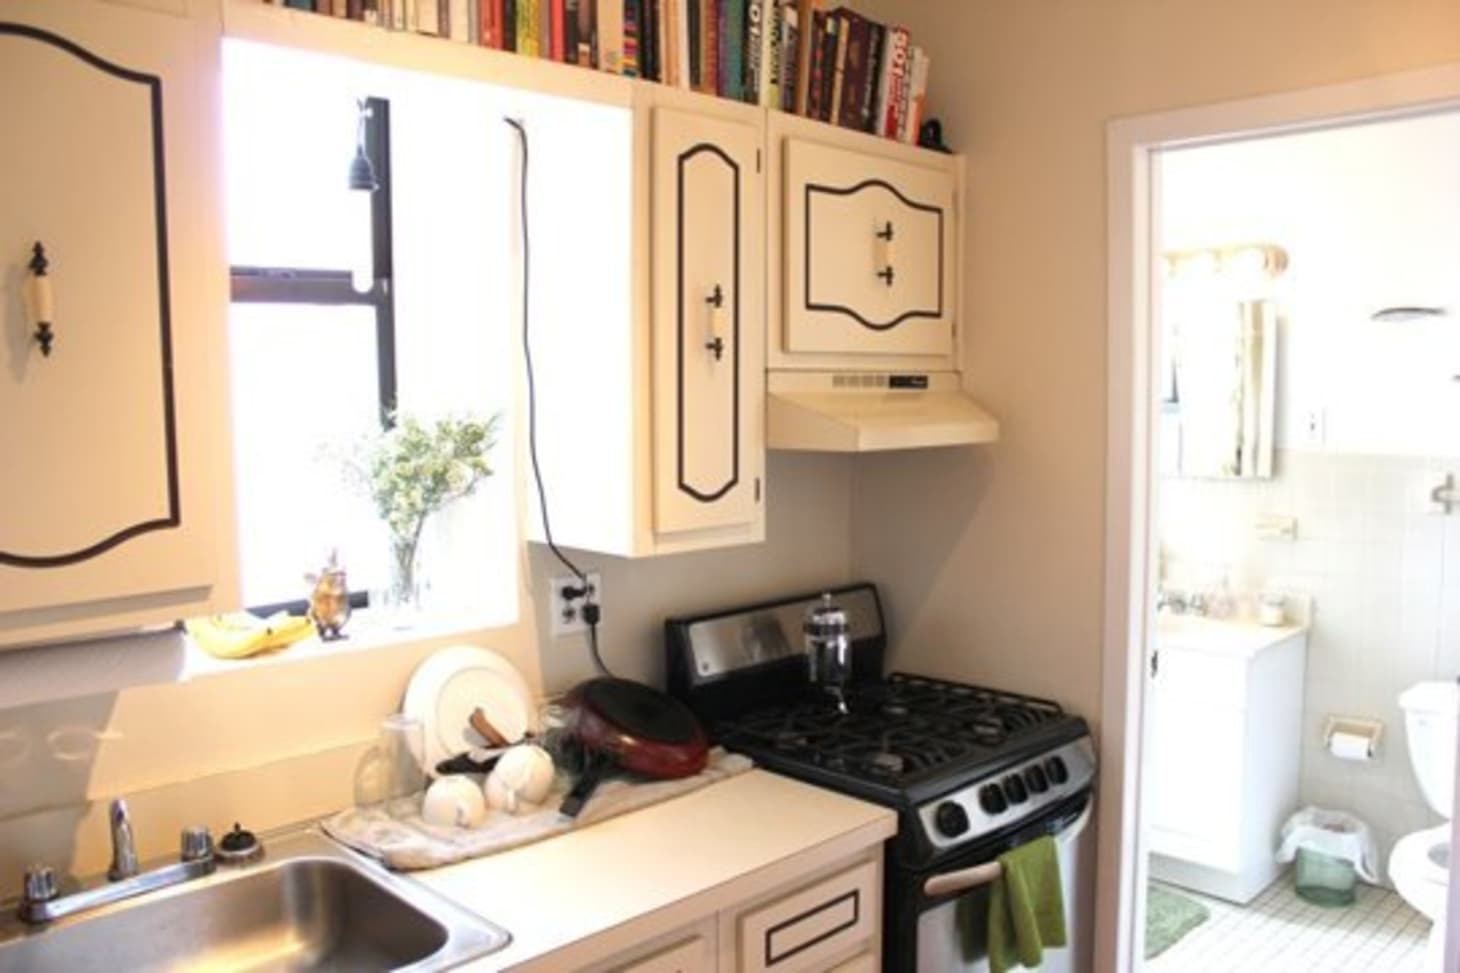 7 Things To Do With That Awkward Space Above The Cabinets